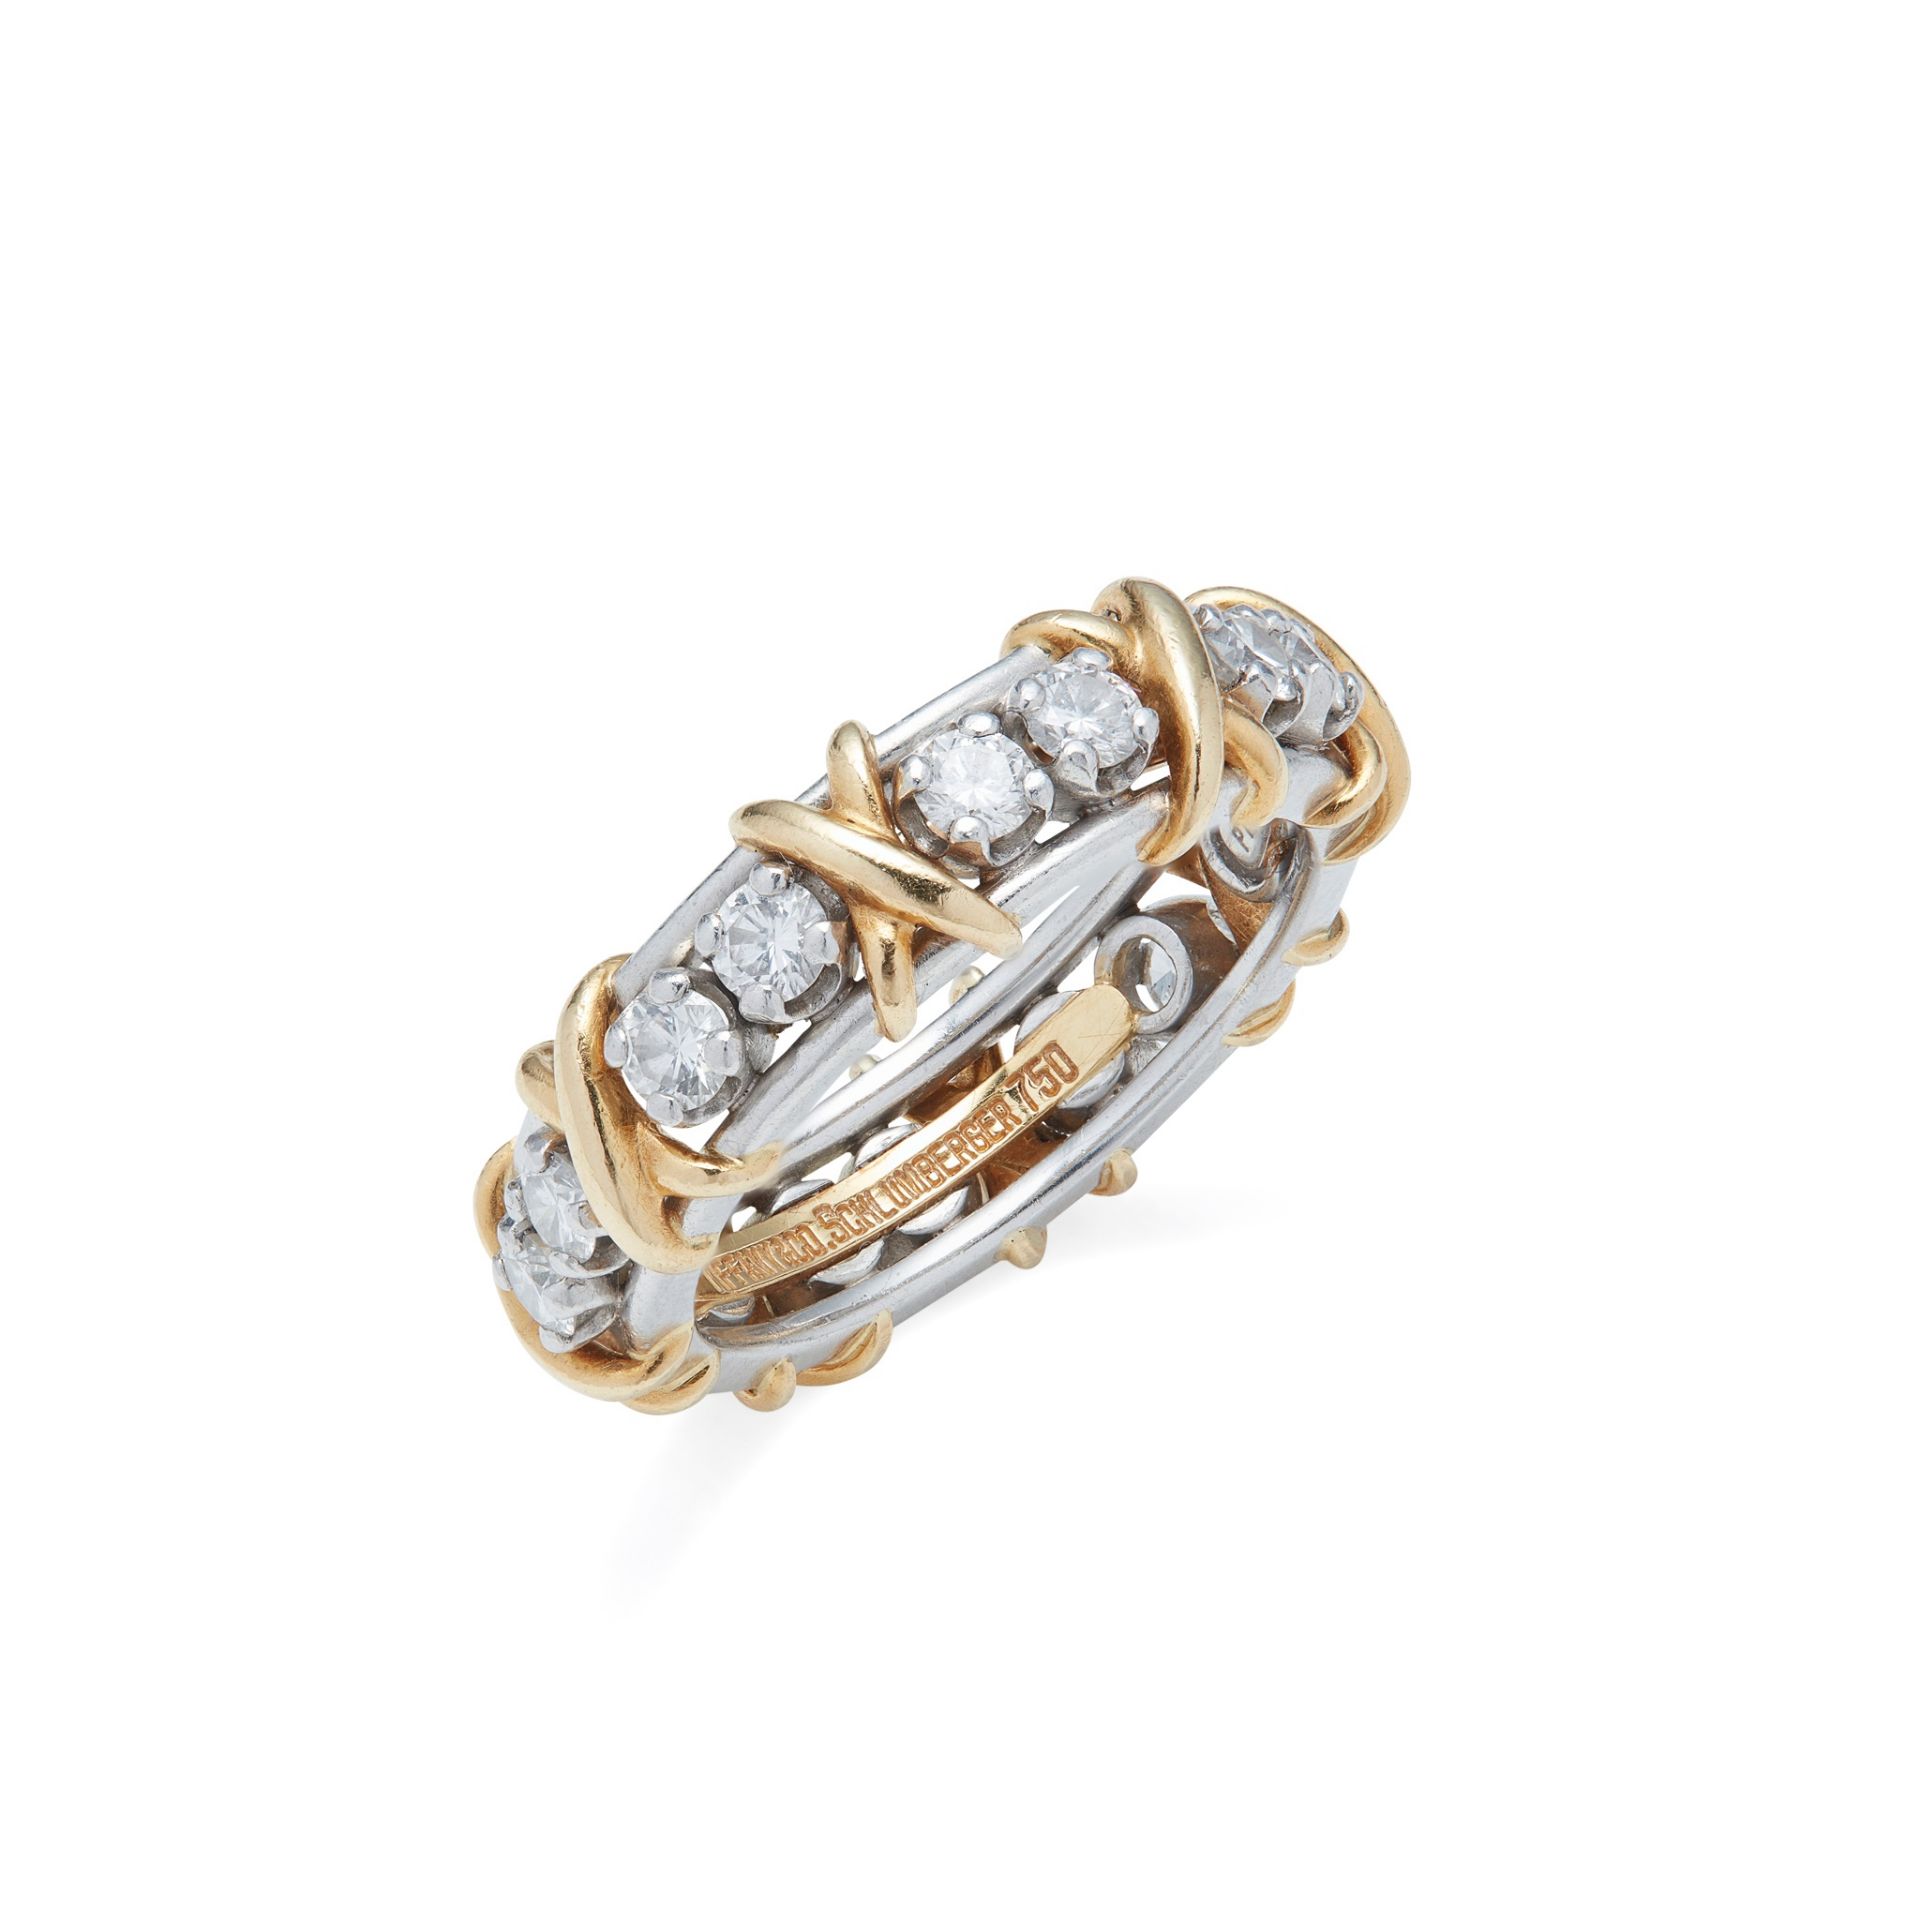 A diamond set eternity ring, Jean Schlumberger for Tiffany & Co